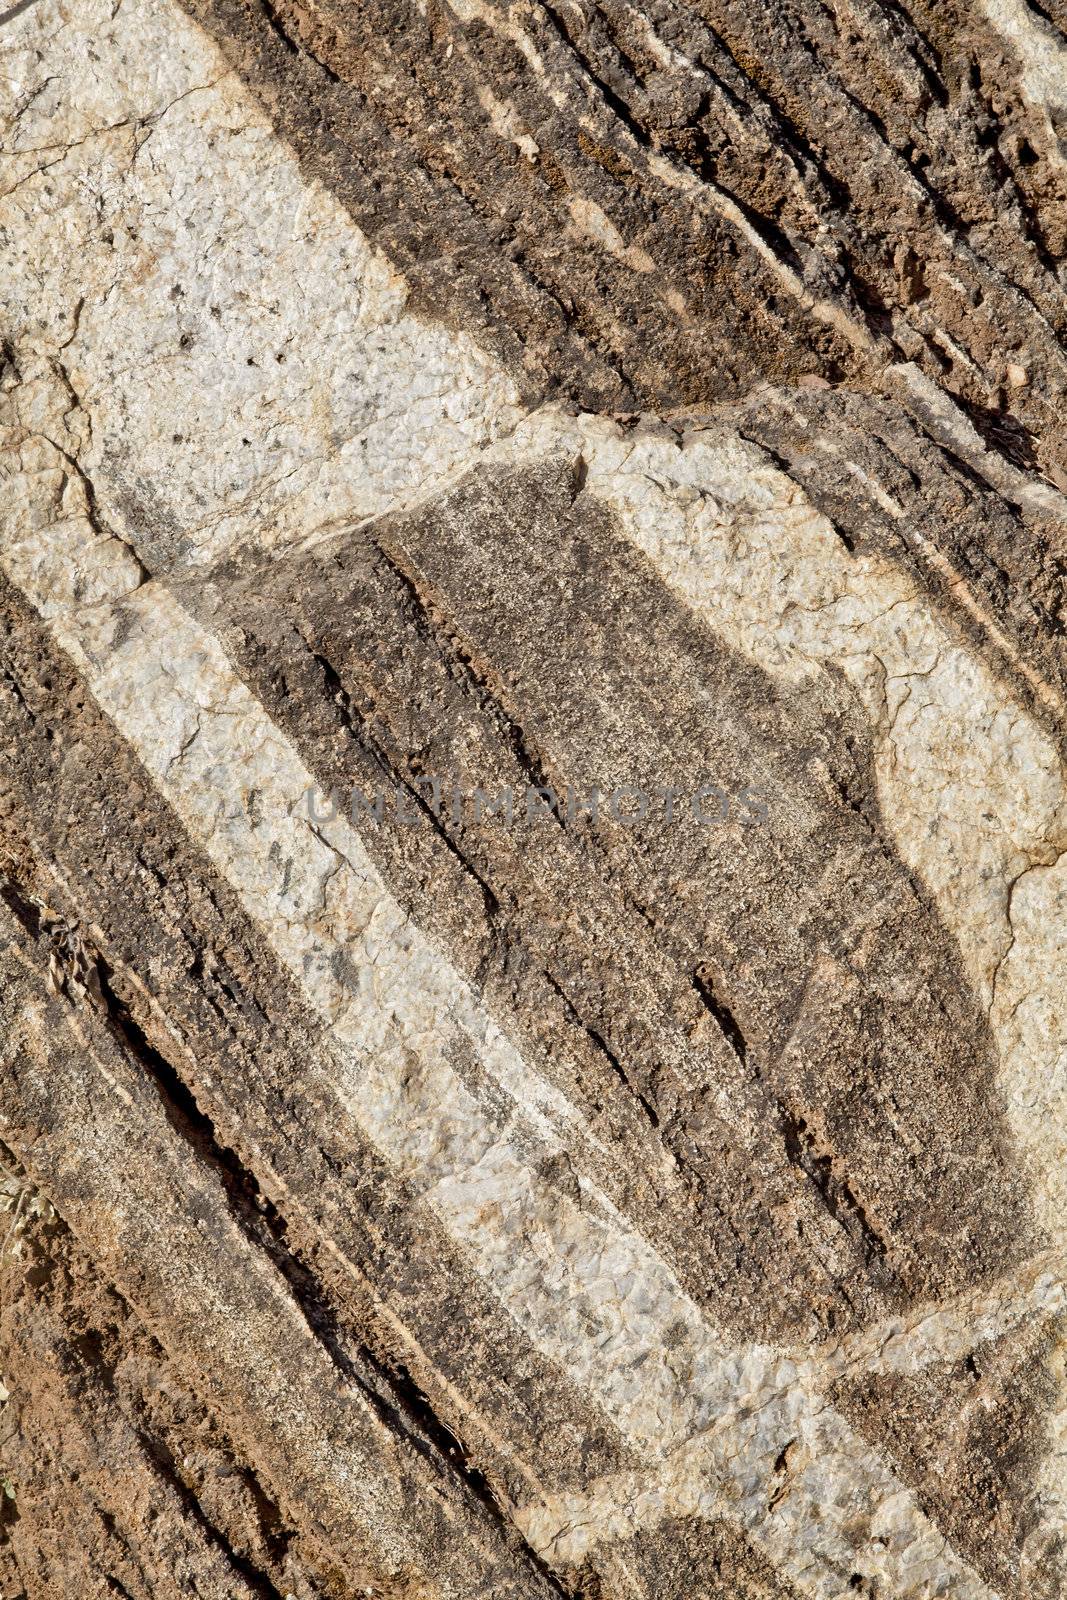 Location is Shiva Devi in Kashmir Northern India for the mountainside rock texture with marbling streaks embedded through evolution. A texture that will stand any orientation